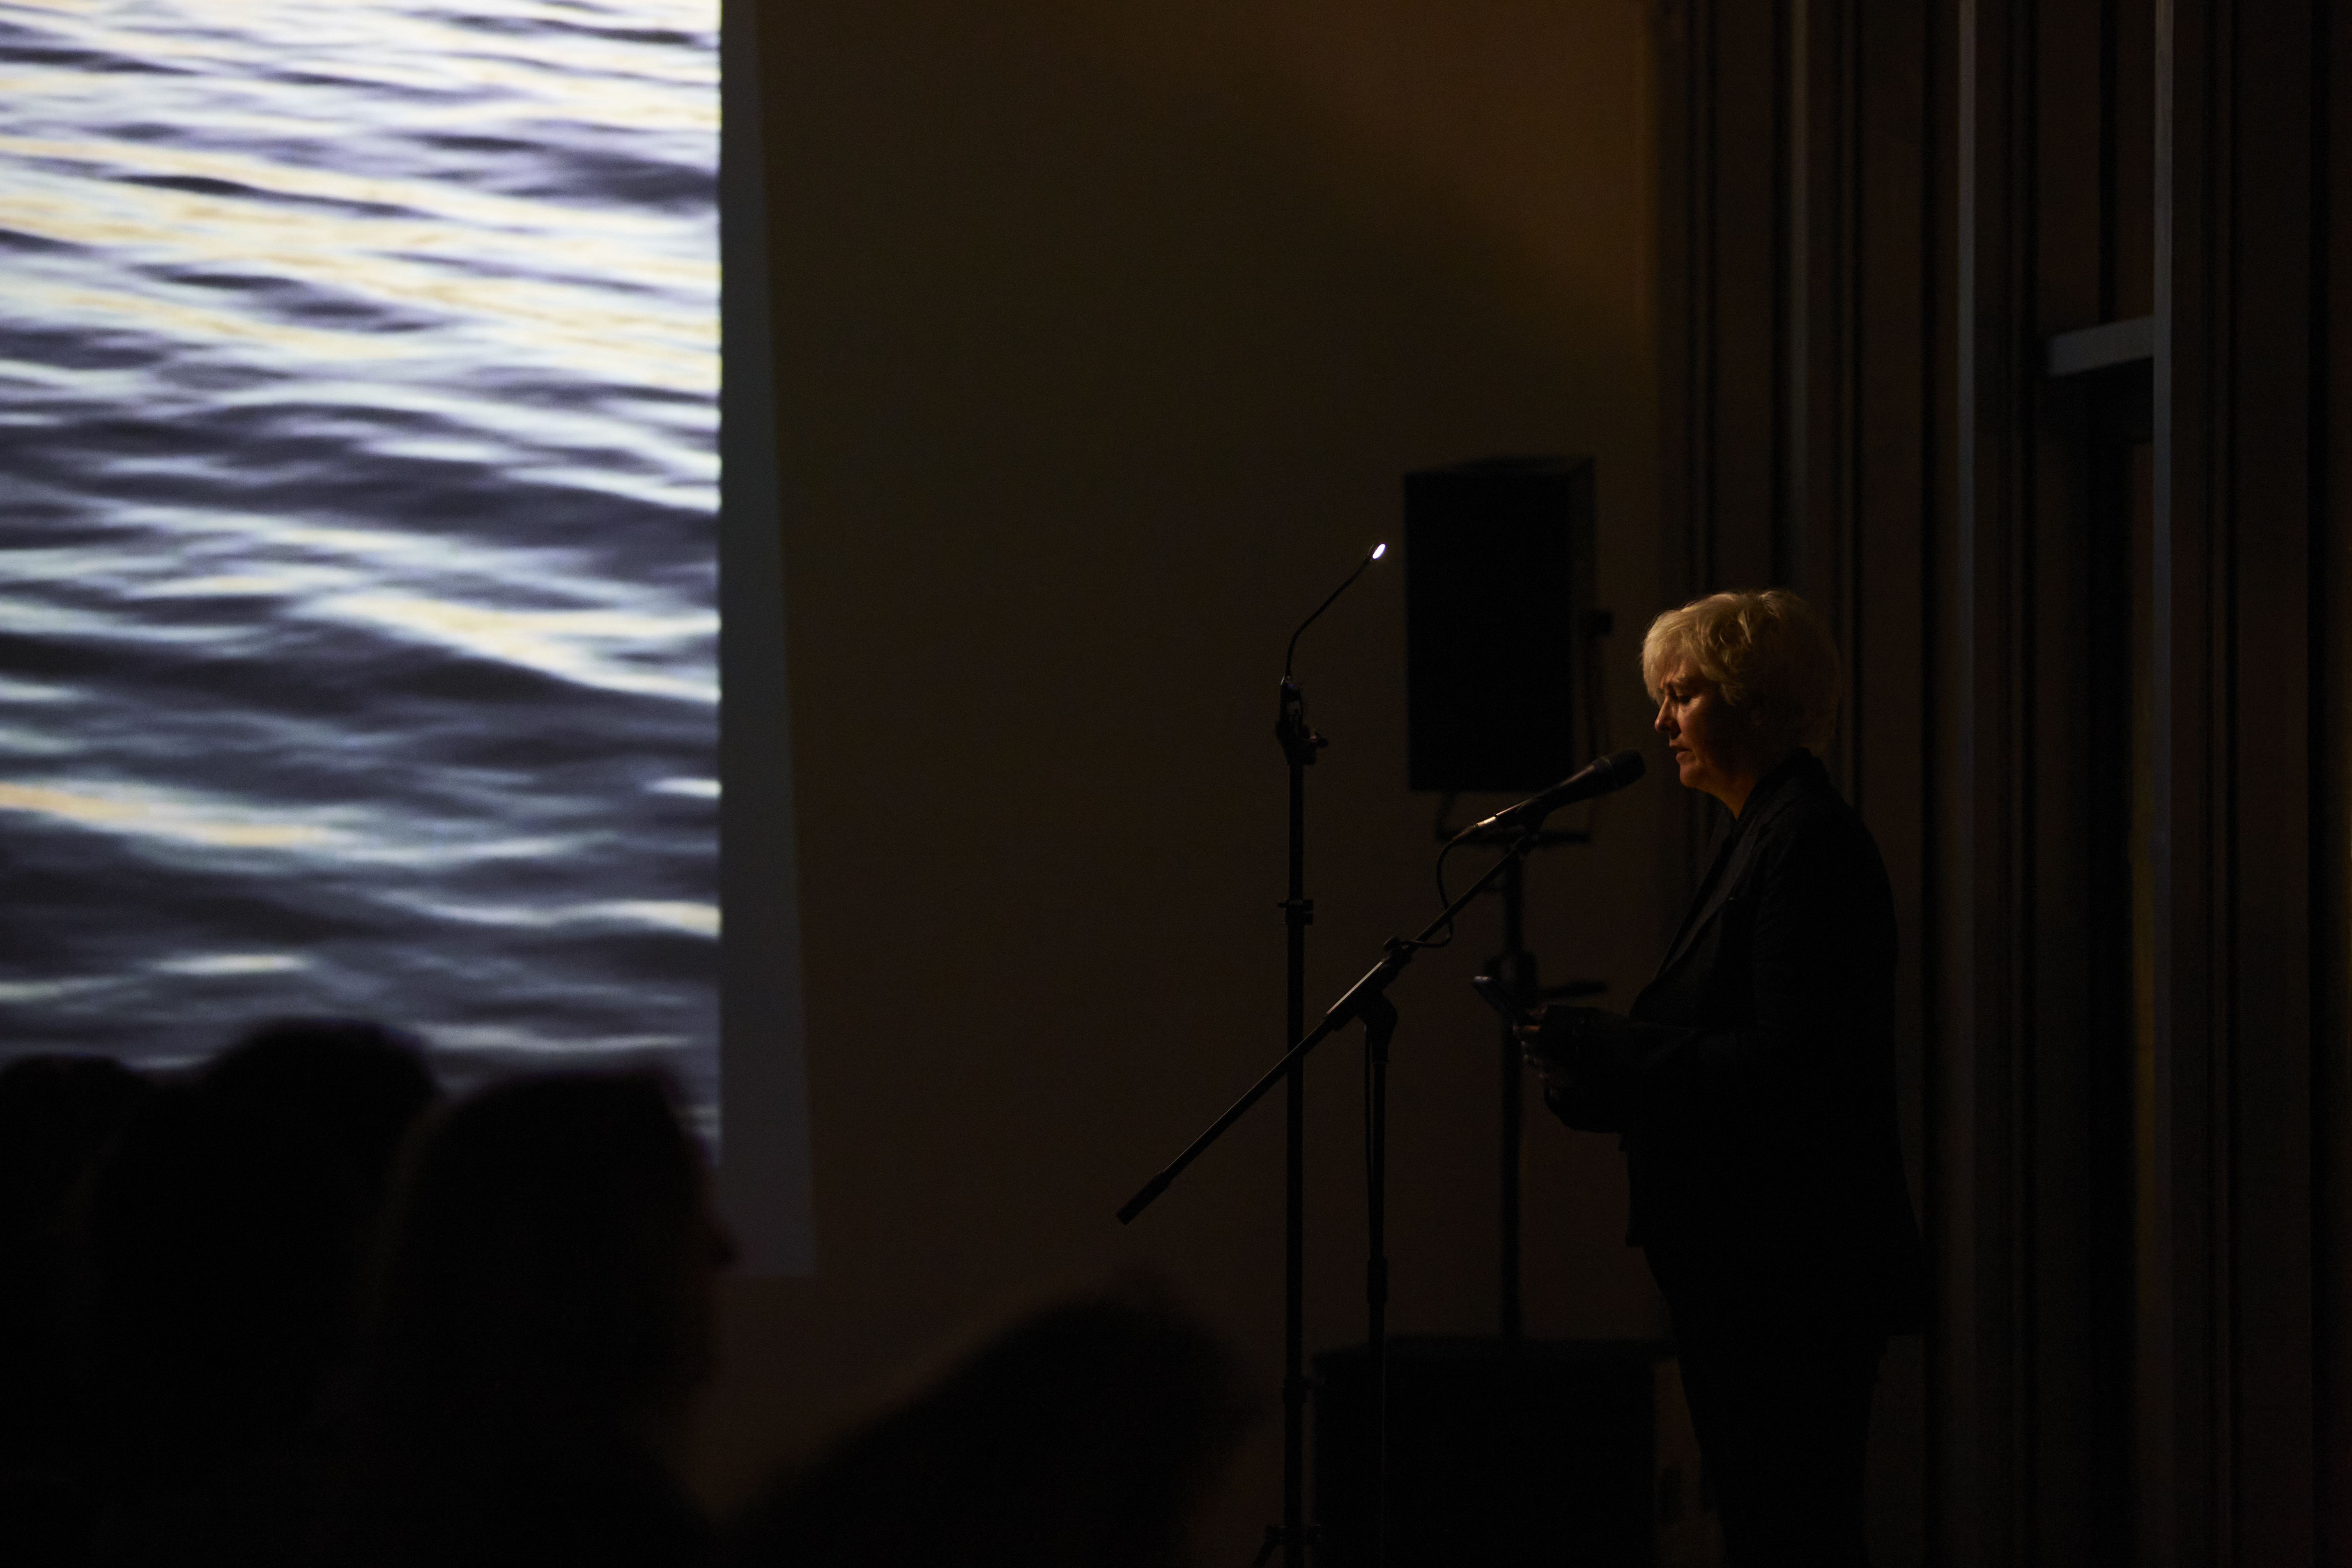 A colour photograph of artist Caroline Bergvall performing Nattsong. Caroline is sat next to a large screen on which is projected an image of water. the image is dark making Caroline almost a silhouette in appearance.